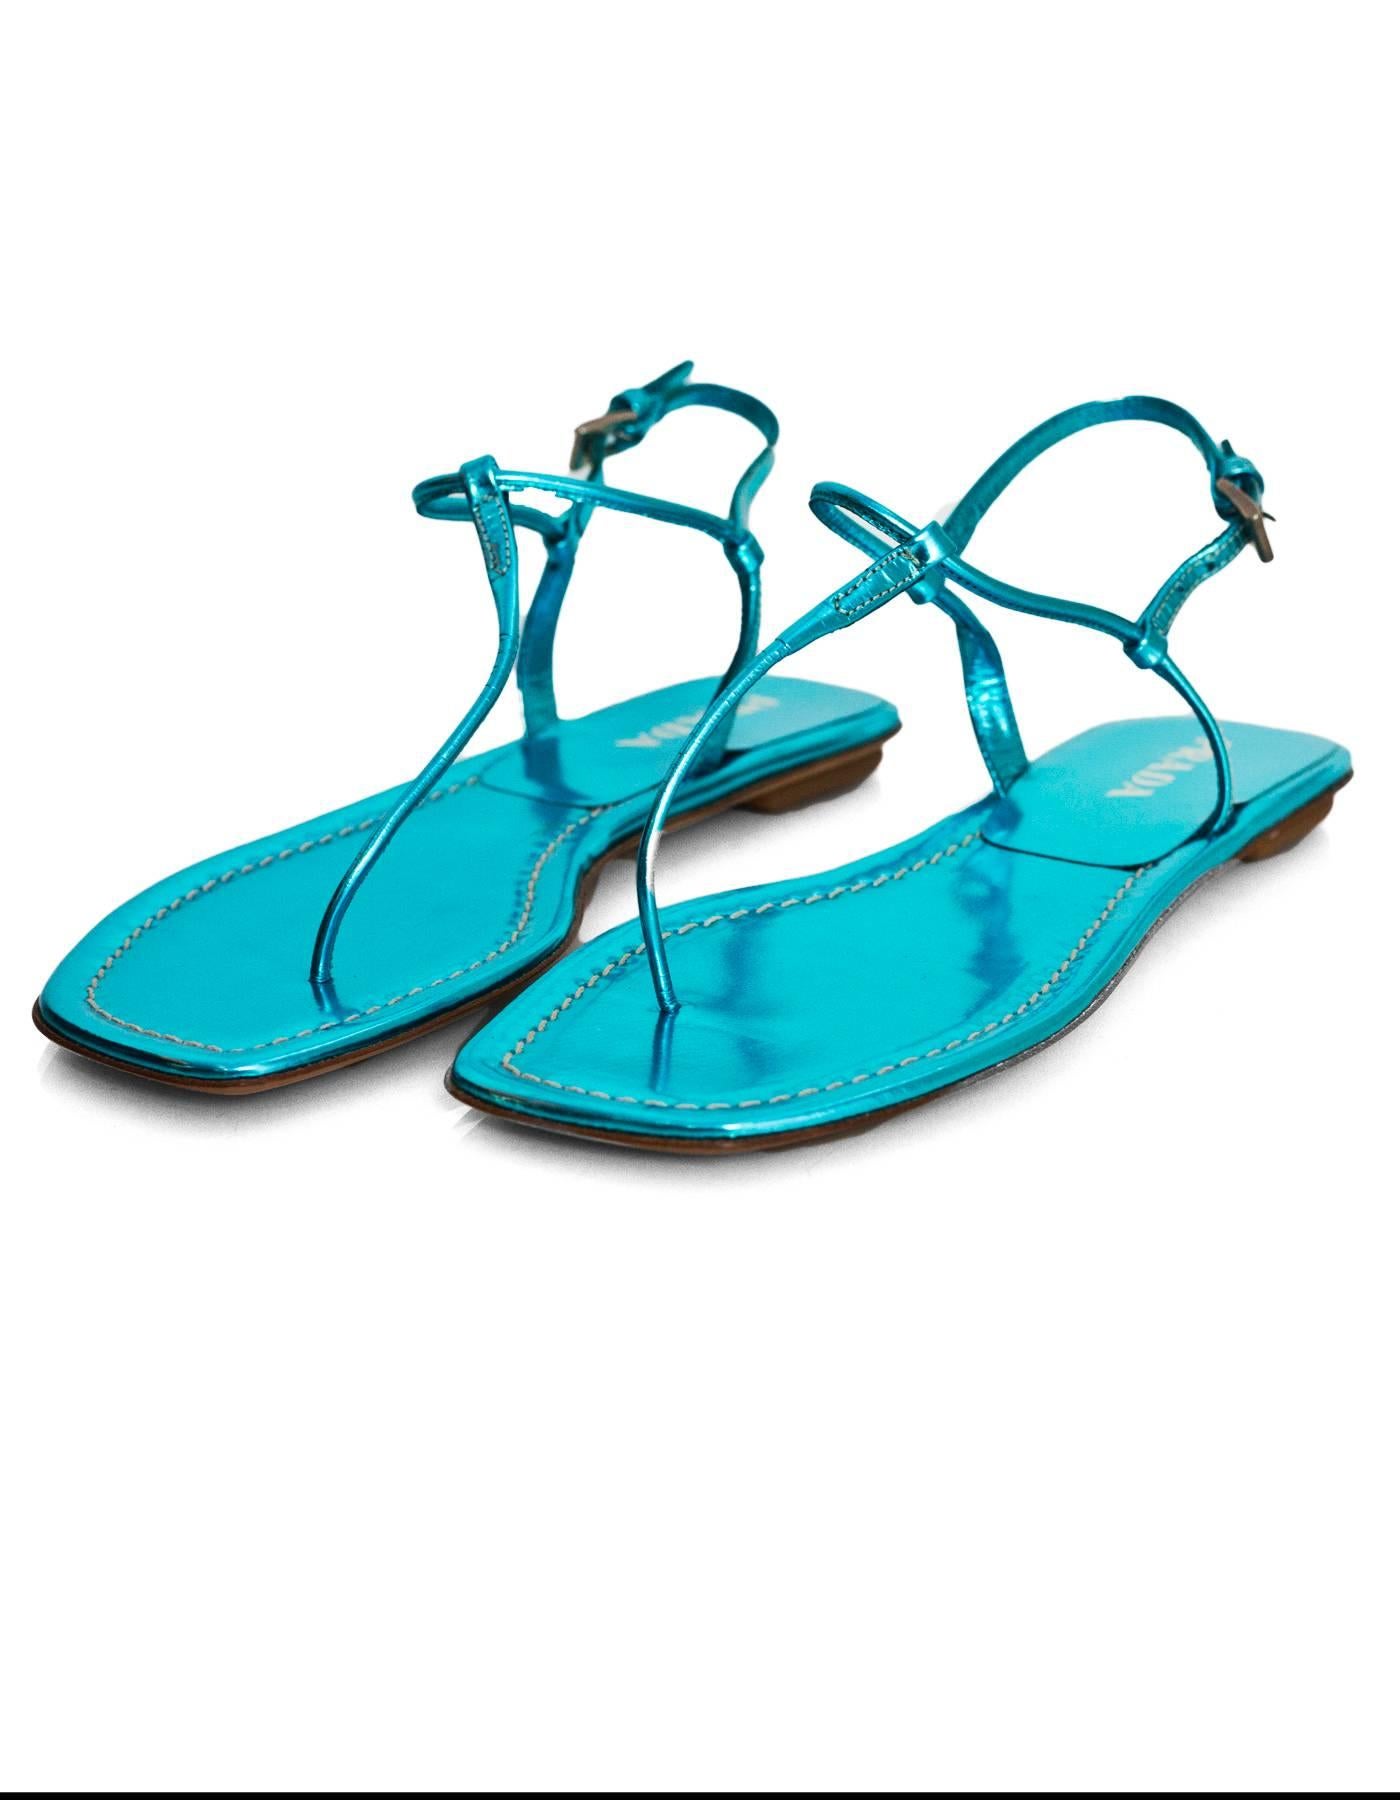 Prada Blue Metallic T-Strap Sandals Sz 35.5 NEW

Made In: Italy
Color: Blue
Materials: Leather
Closure/Opening: Buckle closure at ankle
Sole Stamp: Prada vero cuoio 35.5 made in italy
Retail Price: $550 + tax
Overall Condition: Excellent pre-owned